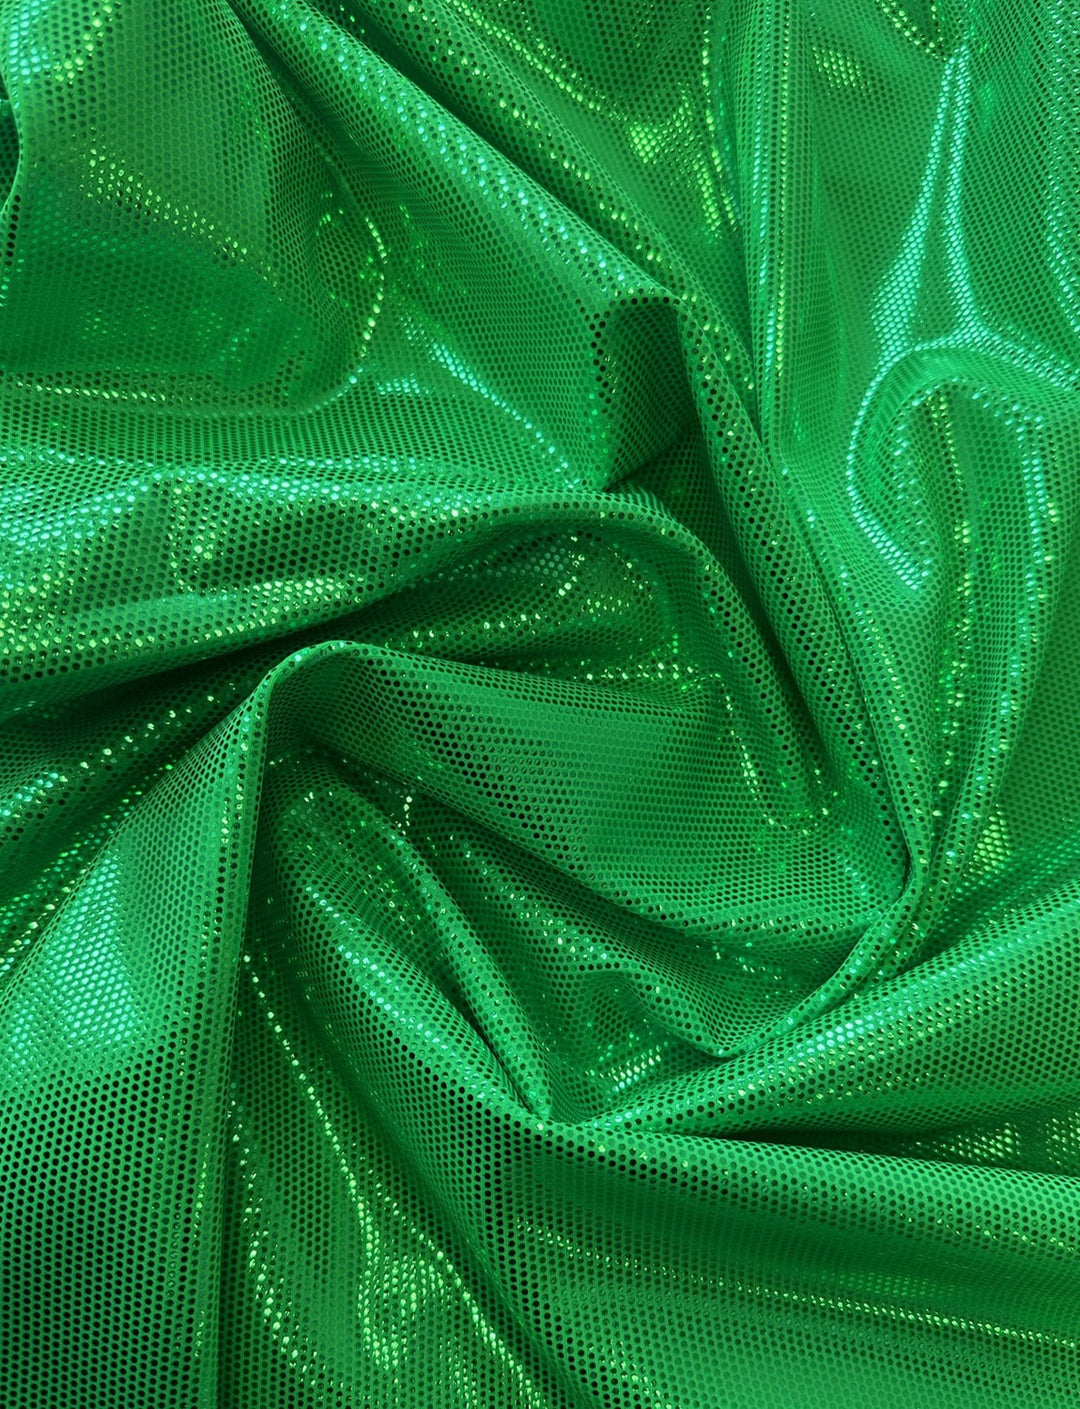 green spotted foil printed on green lycra